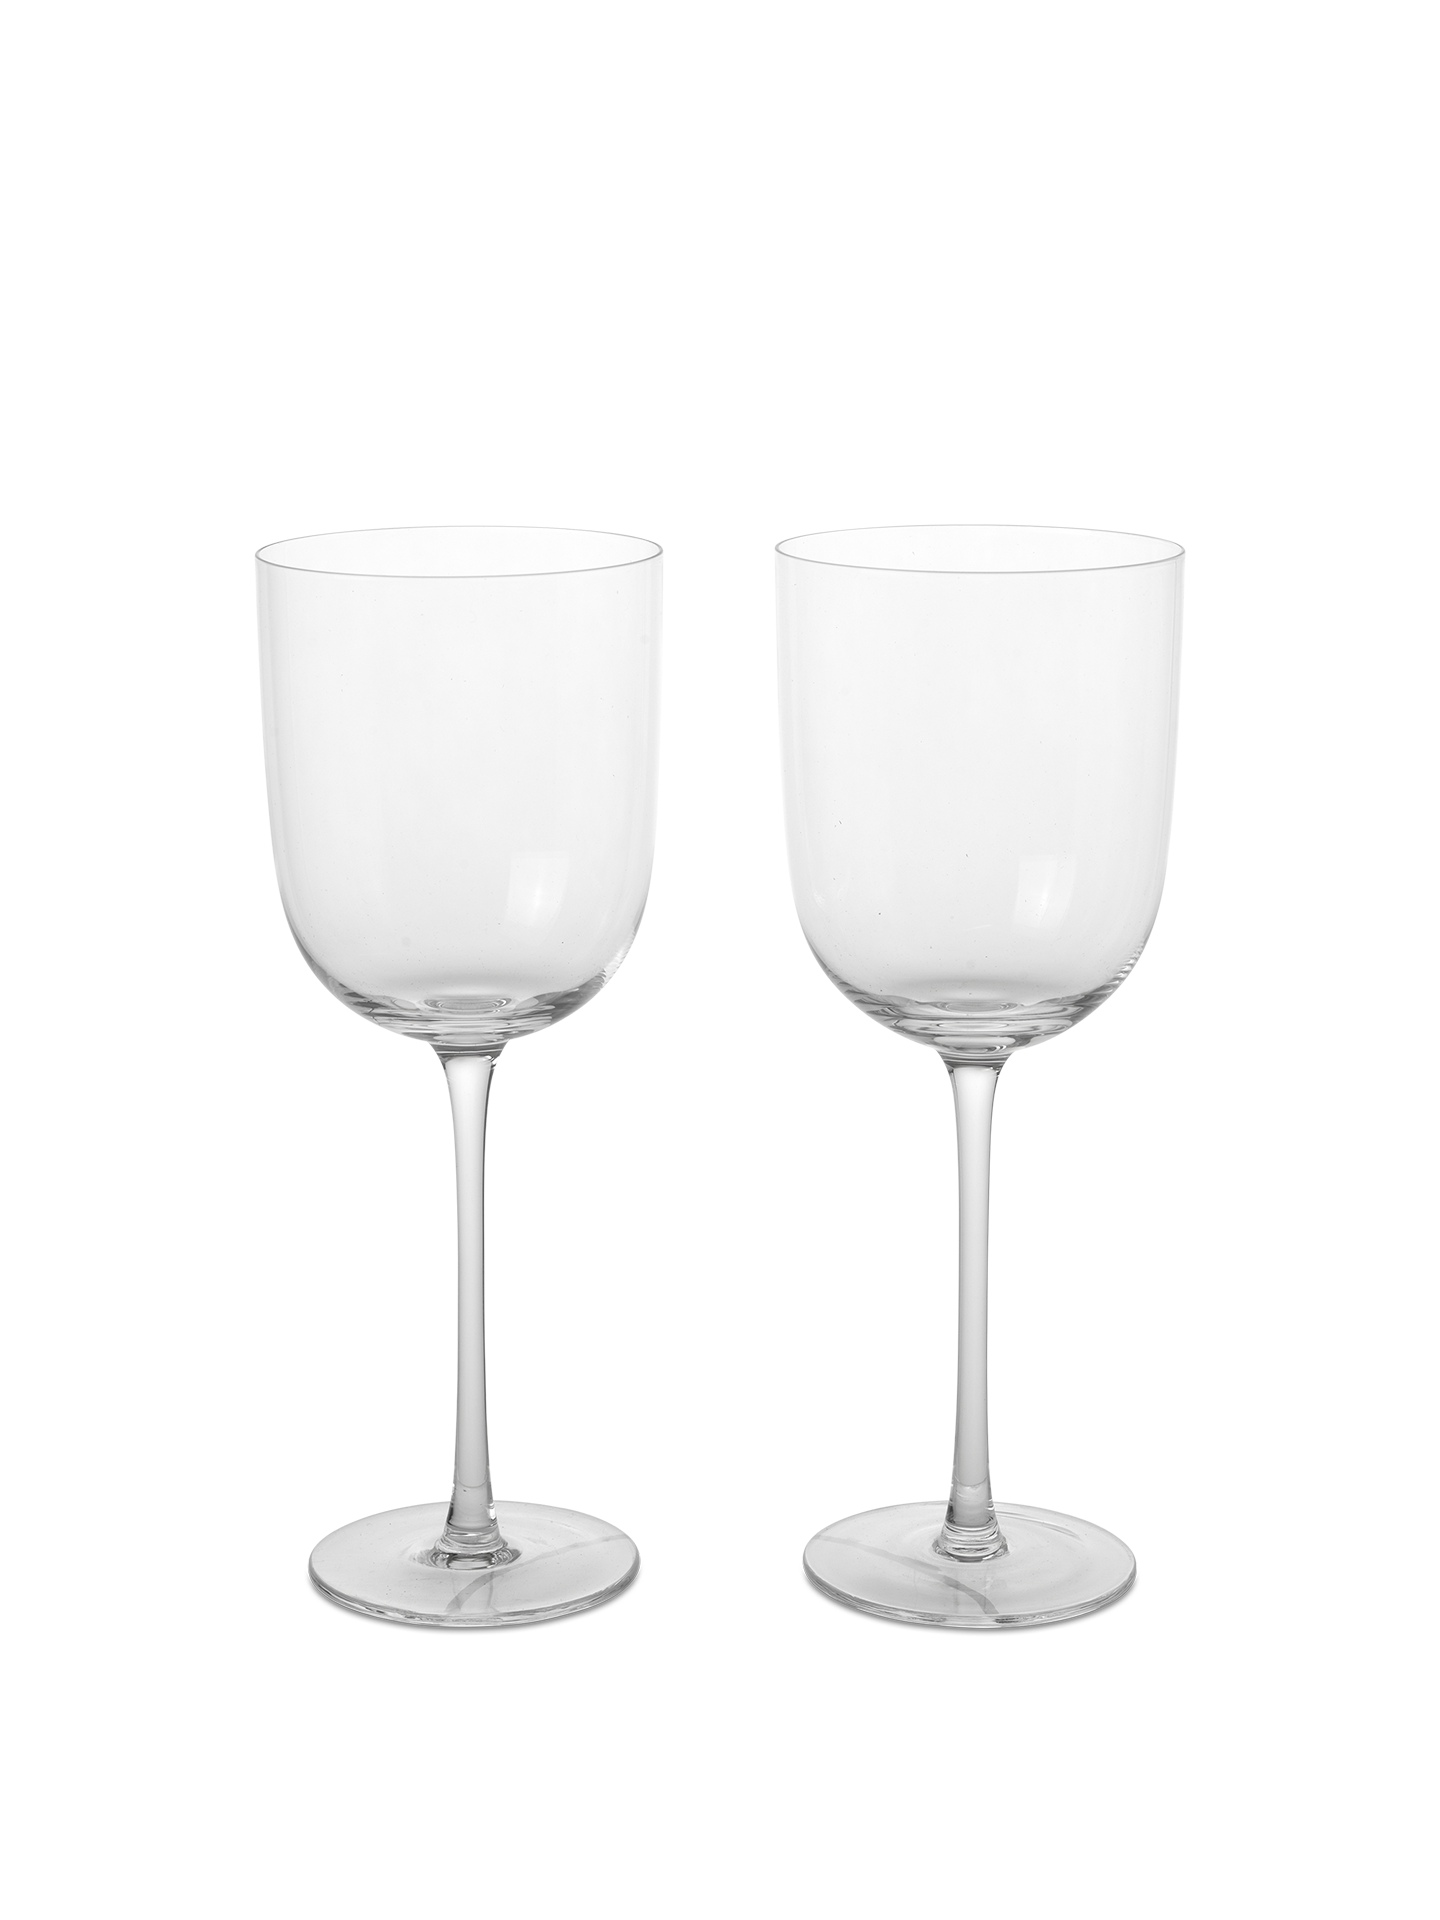 Host Red Wine Glasses - Set of 2 - Clear